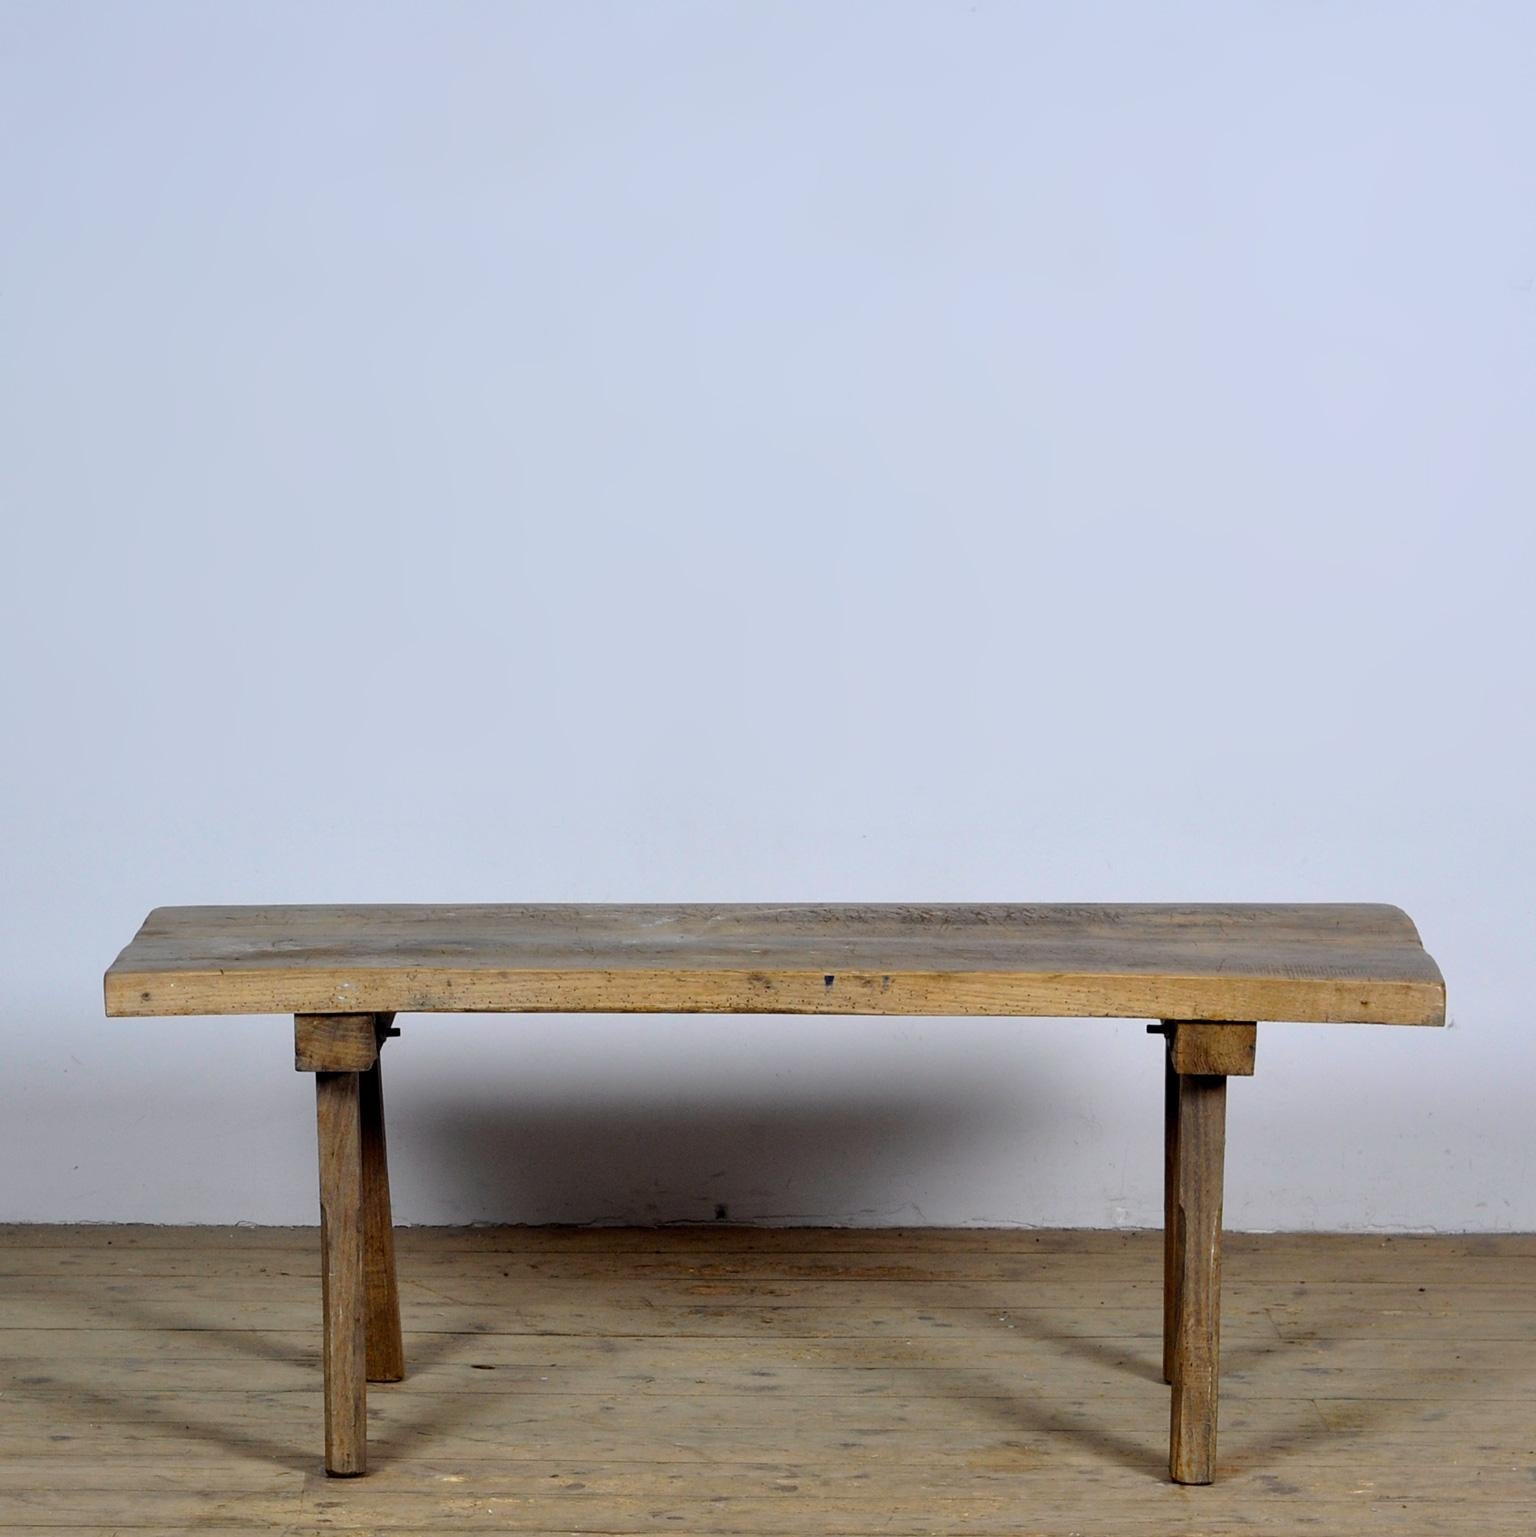 This oak butcher's farm table was produced in hungary around the 1920s. With an oak top of 5 cm thick. The legs are shortened to the ideal height for a coffee table or bench. Treated for woodworm. 